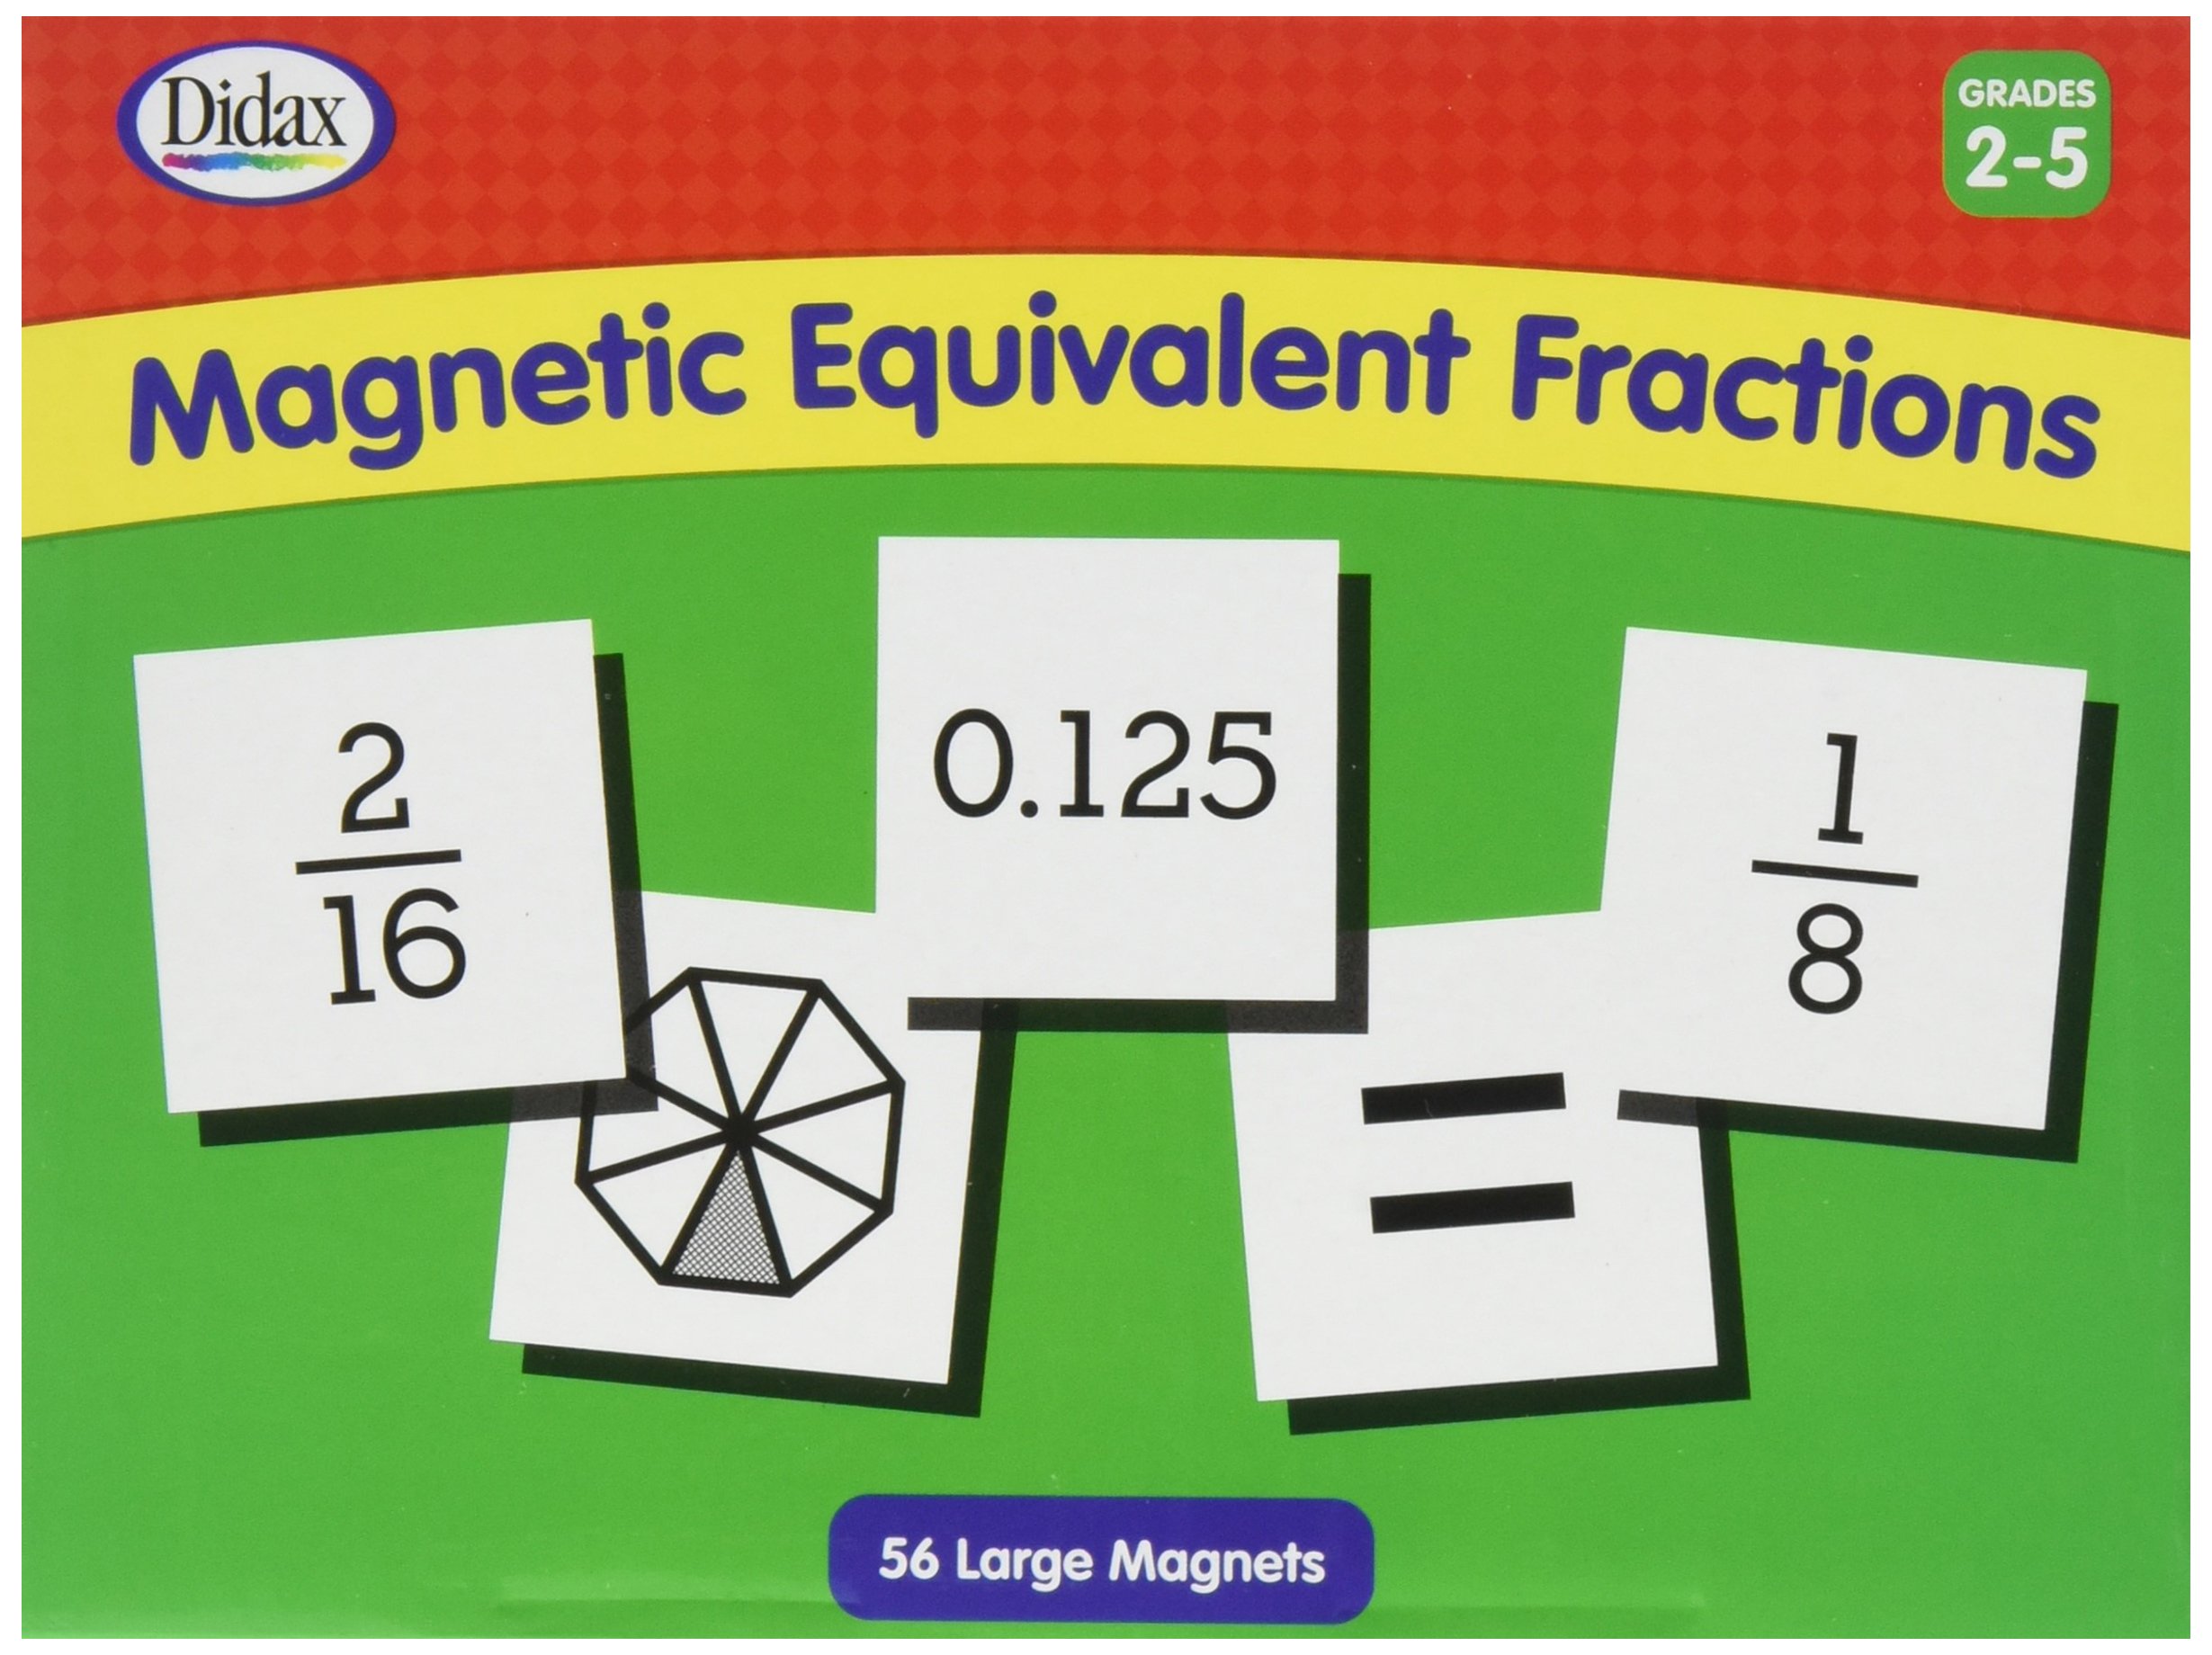 Didax Educational Resources Magnetic Equivalent Fractions